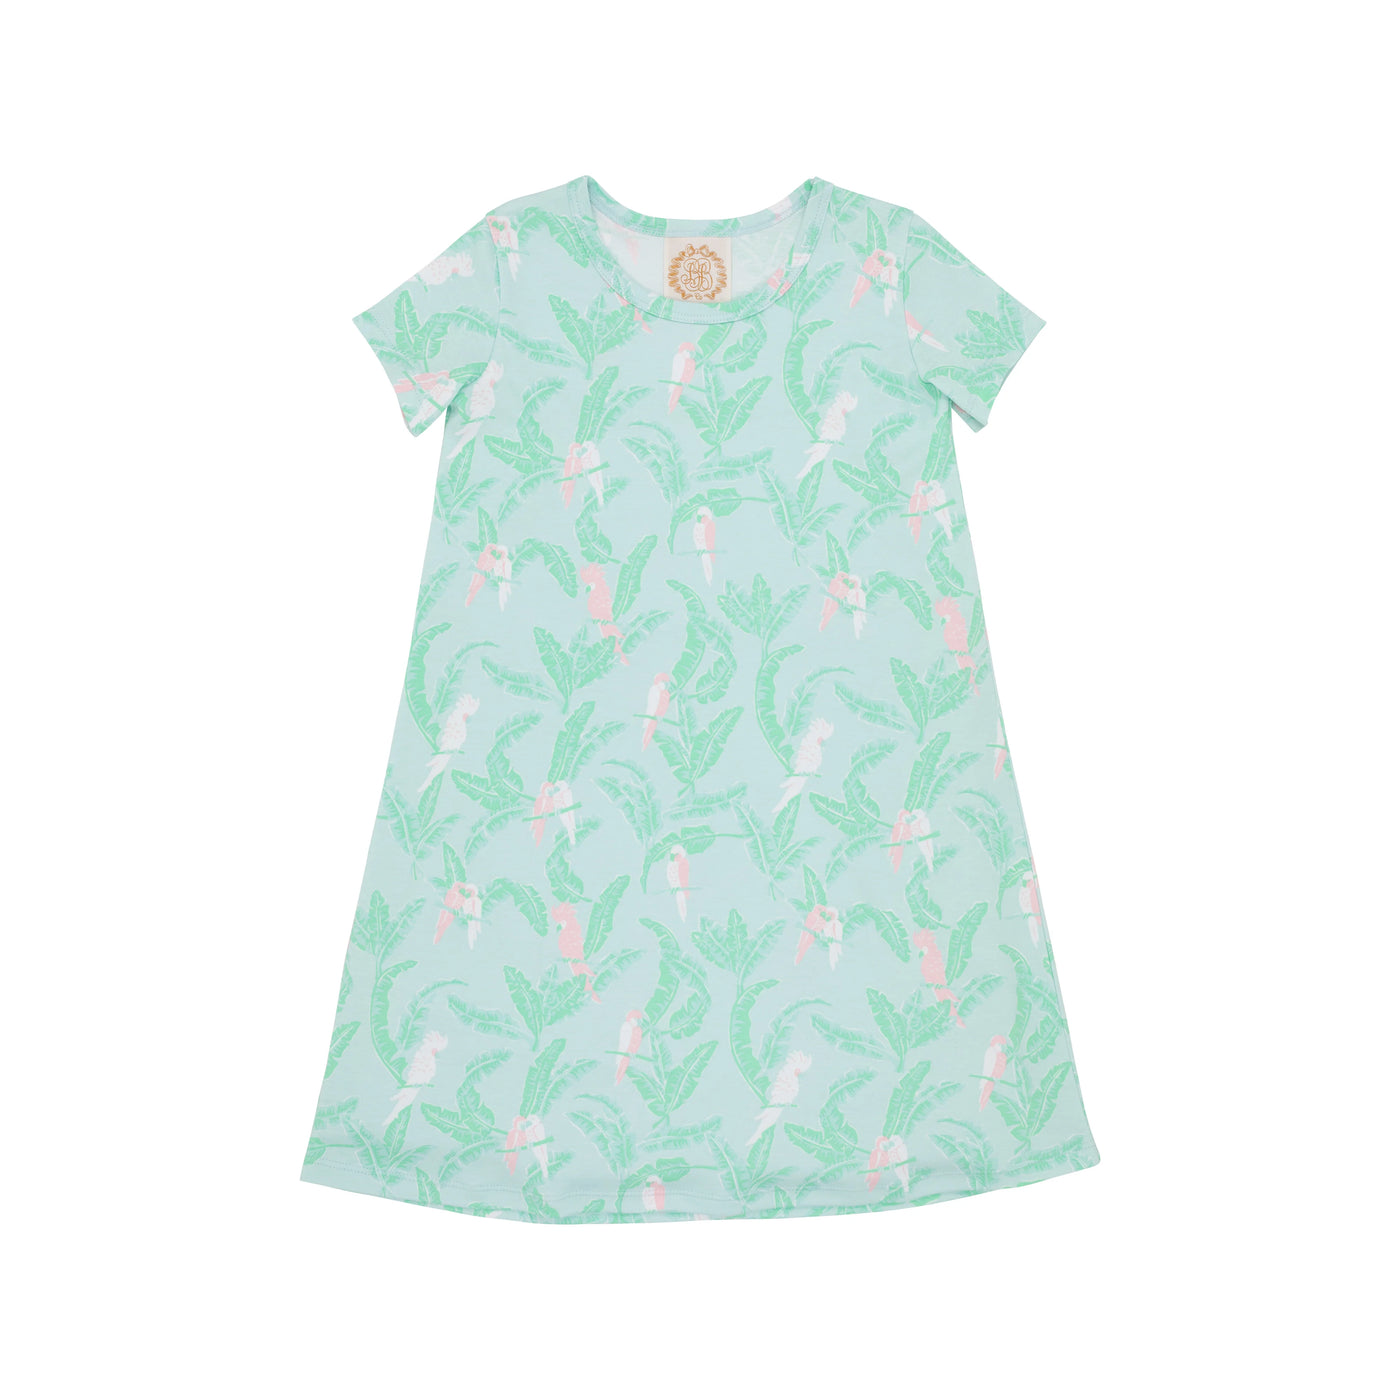 Polly Play Dress-Parrot Island Palms